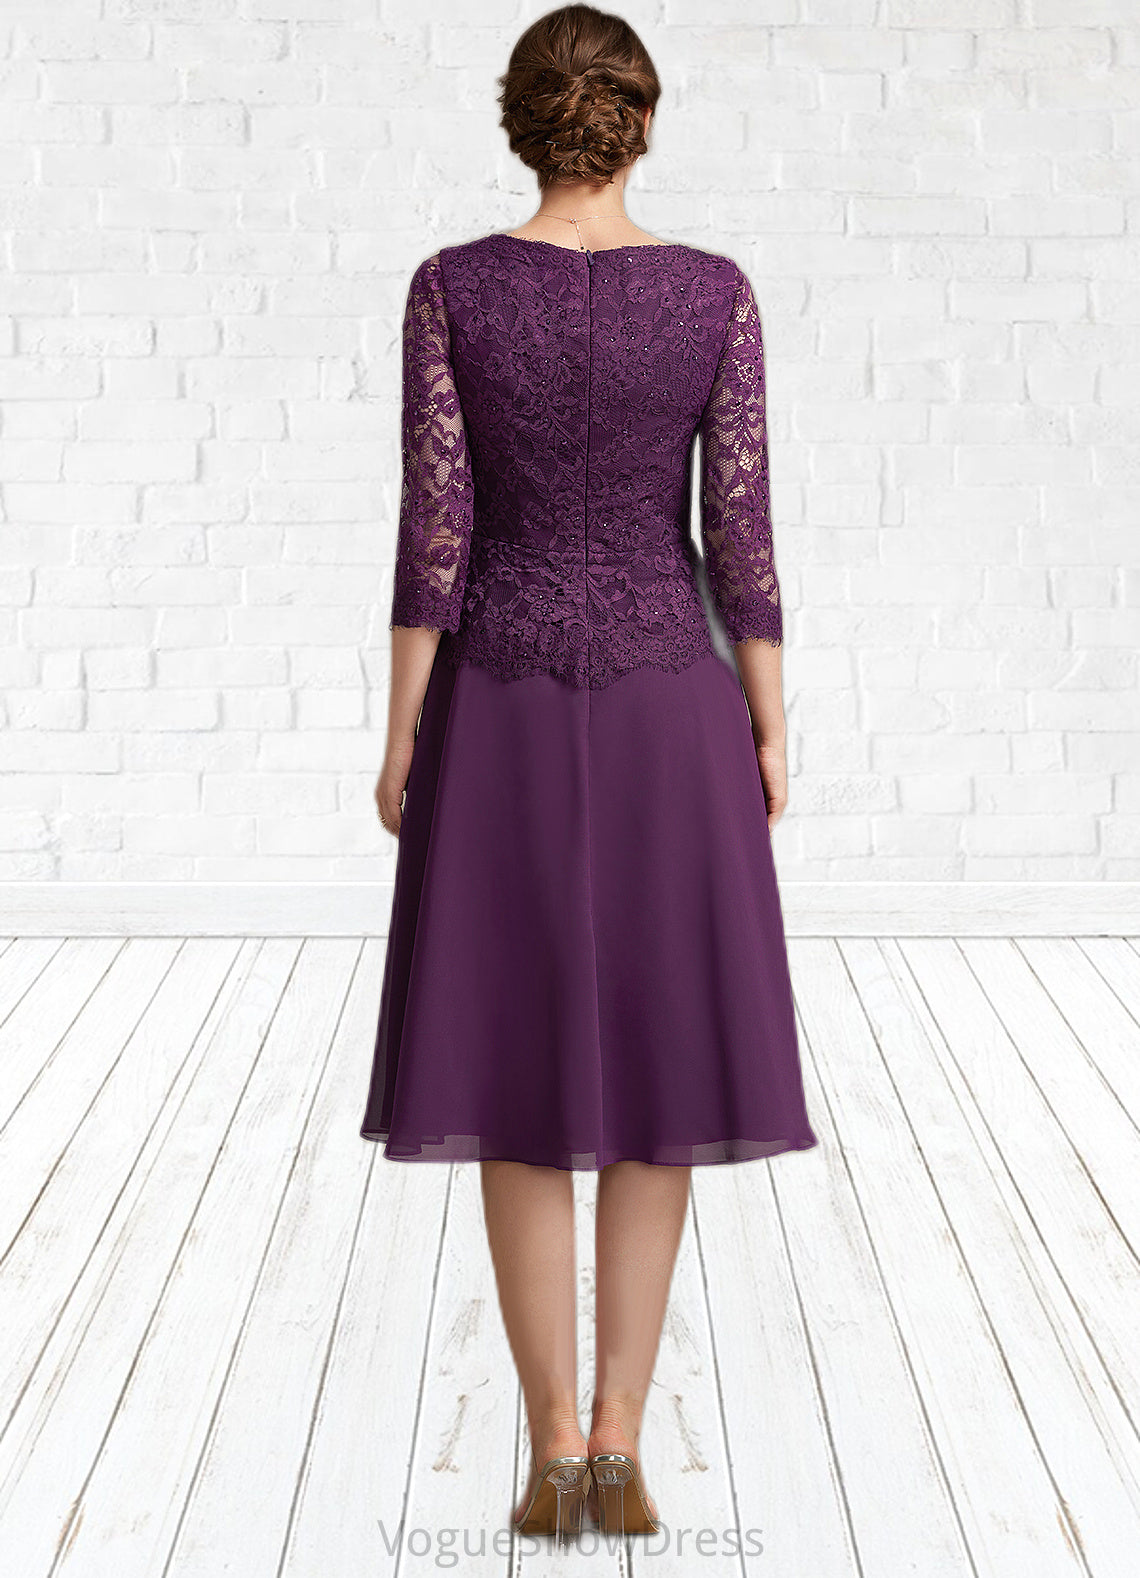 Kali A-Line V-neck Knee-Length Chiffon Lace Mother of the Bride Dress With Beading Sequins DL126P0015035